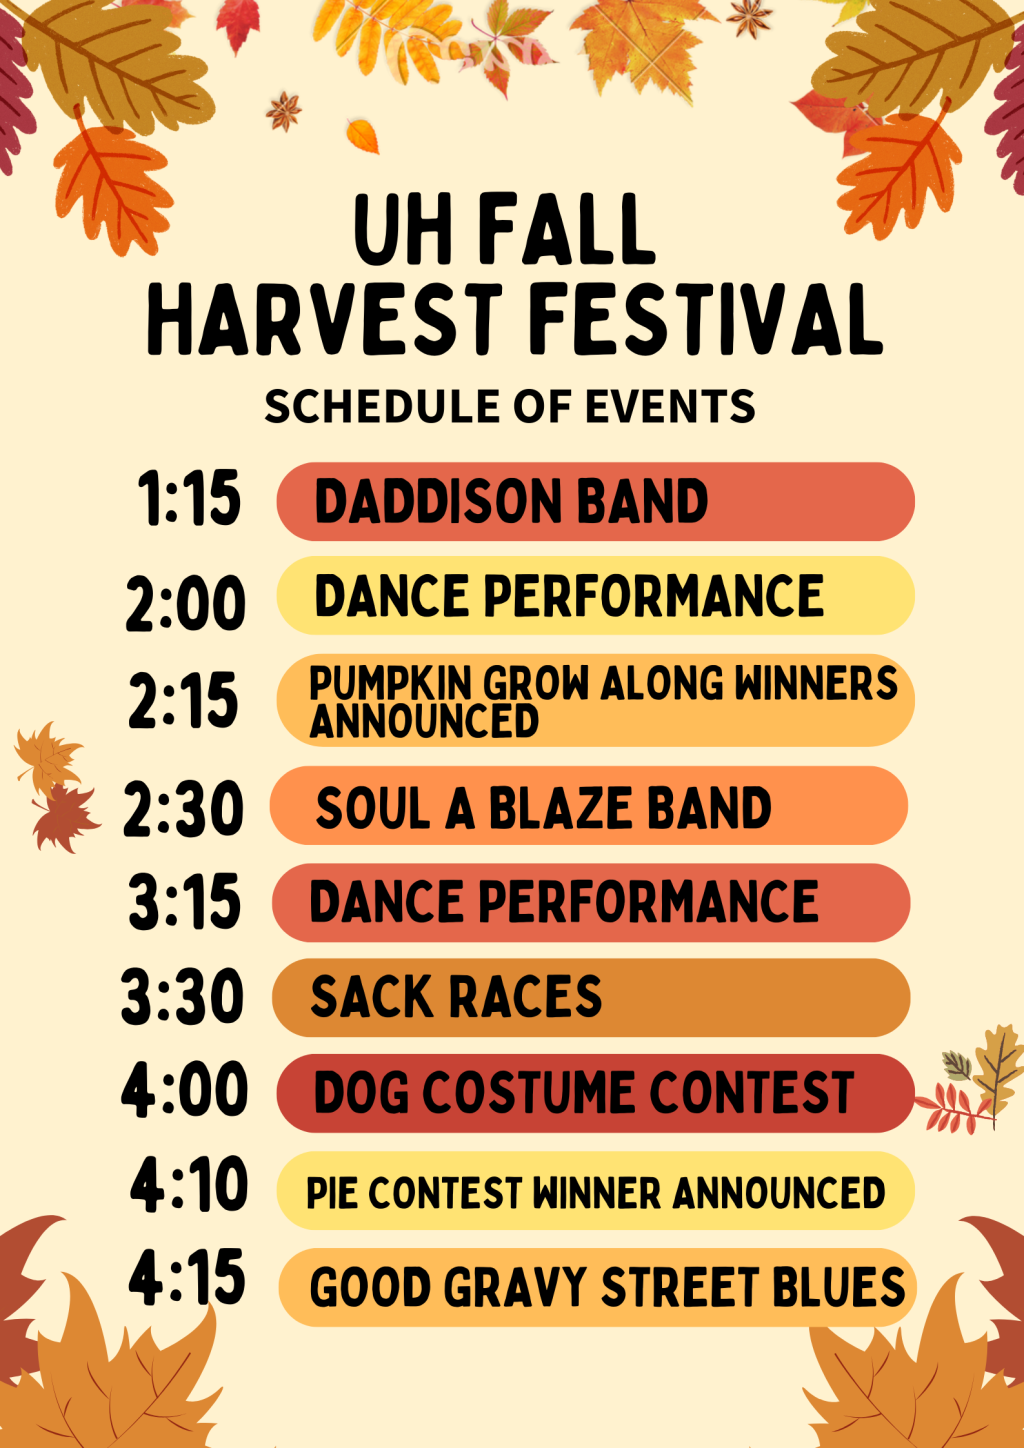 UH Fall Harvest Festival Schedule of Events